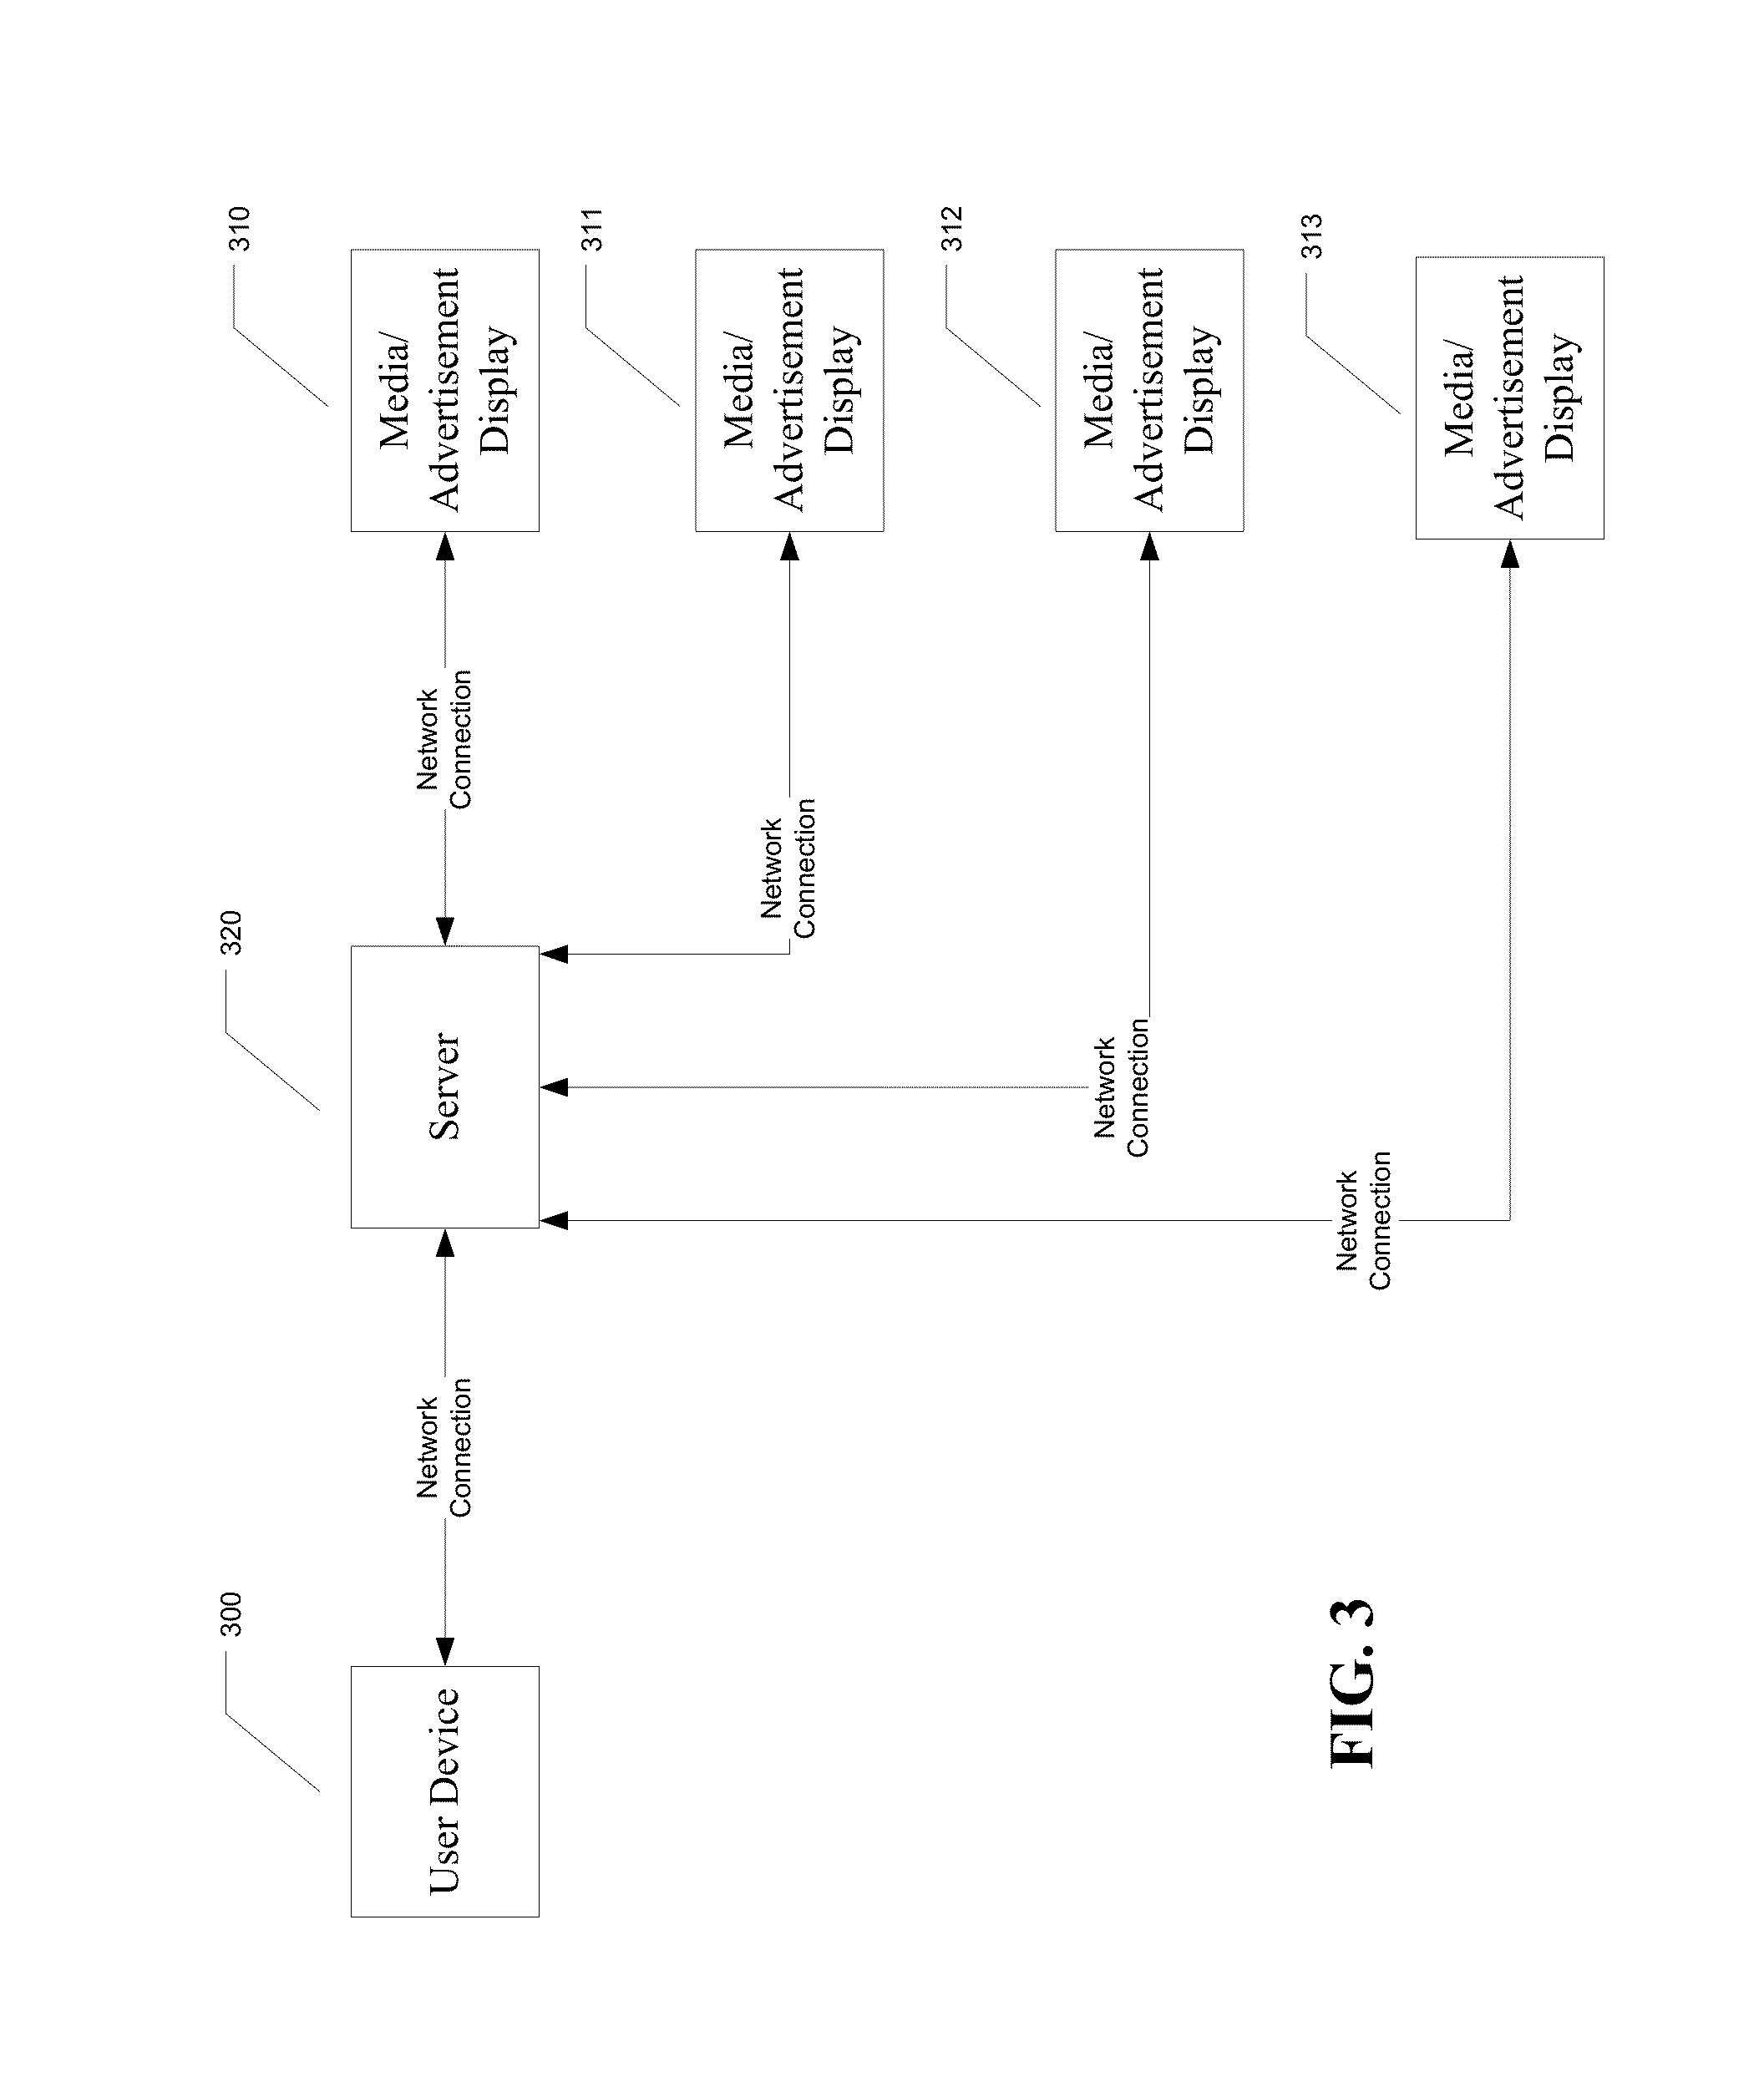 System and method for interactive multimedia placement